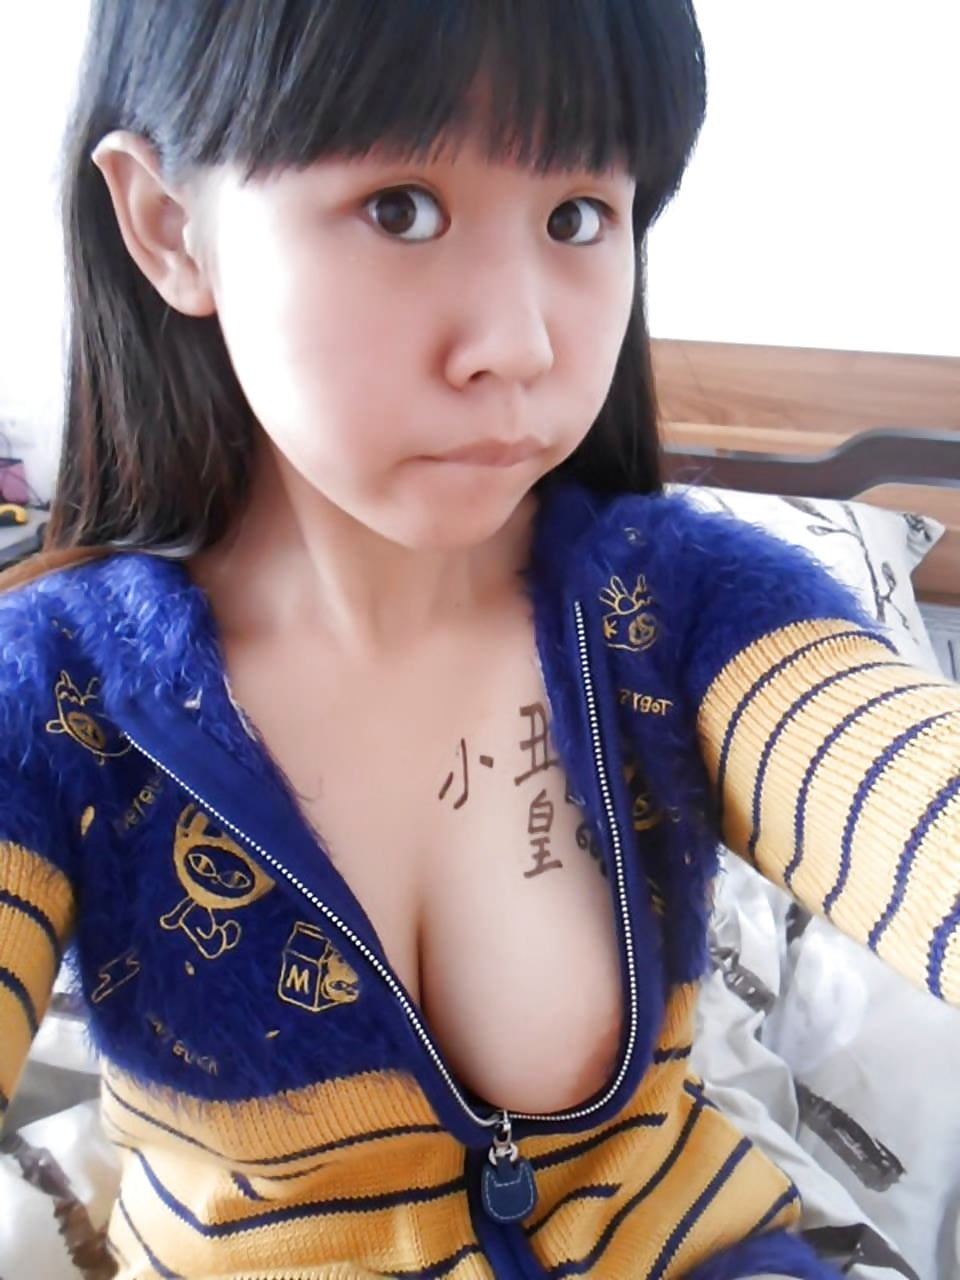 Chinese_teen_exposed (14/54)